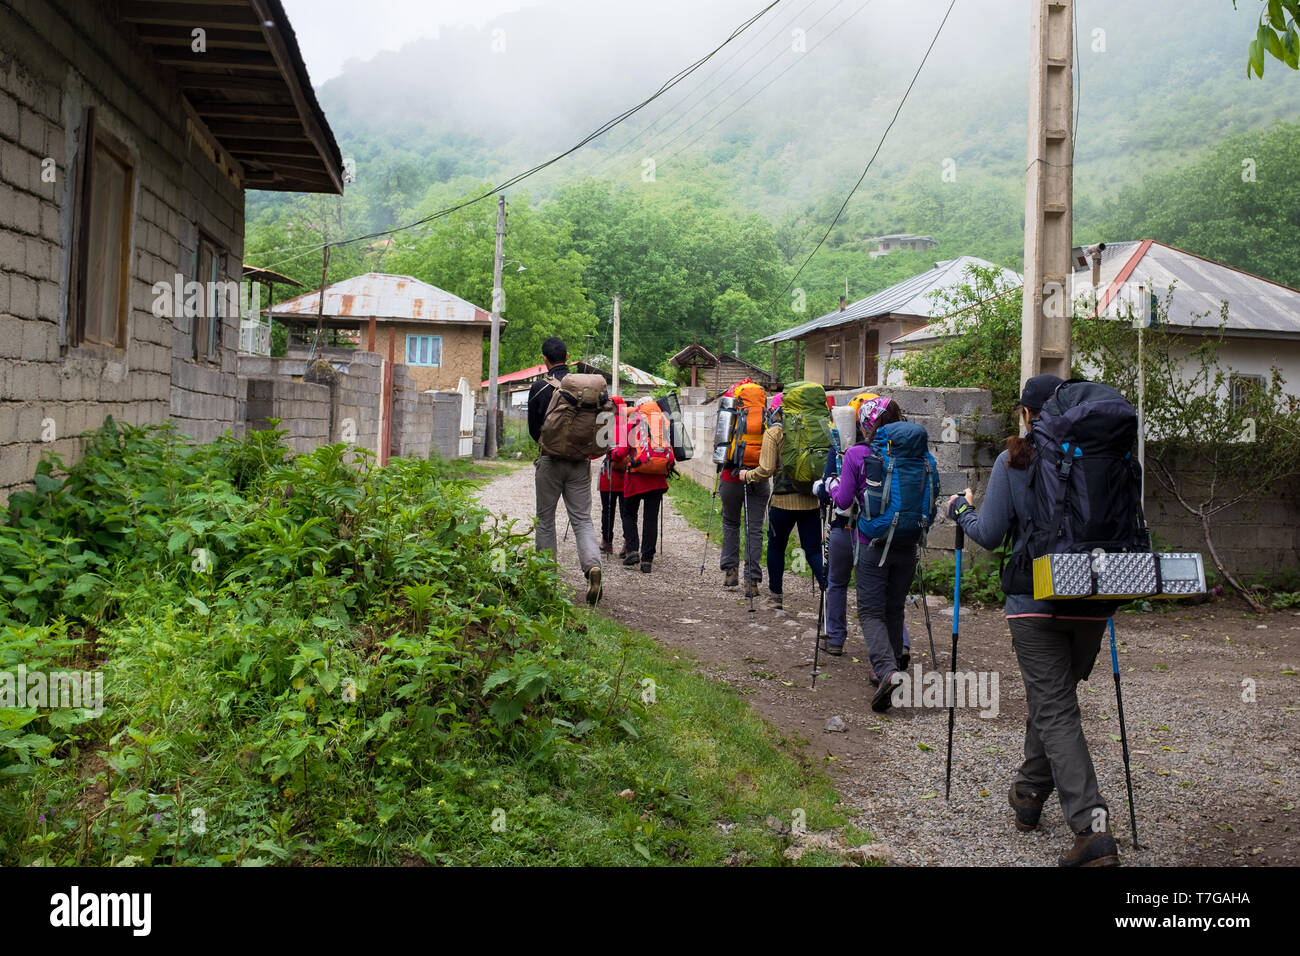 A group of hiker is passing through rural area in the north of Iran. Jungle sight is in the background. Stock Photo